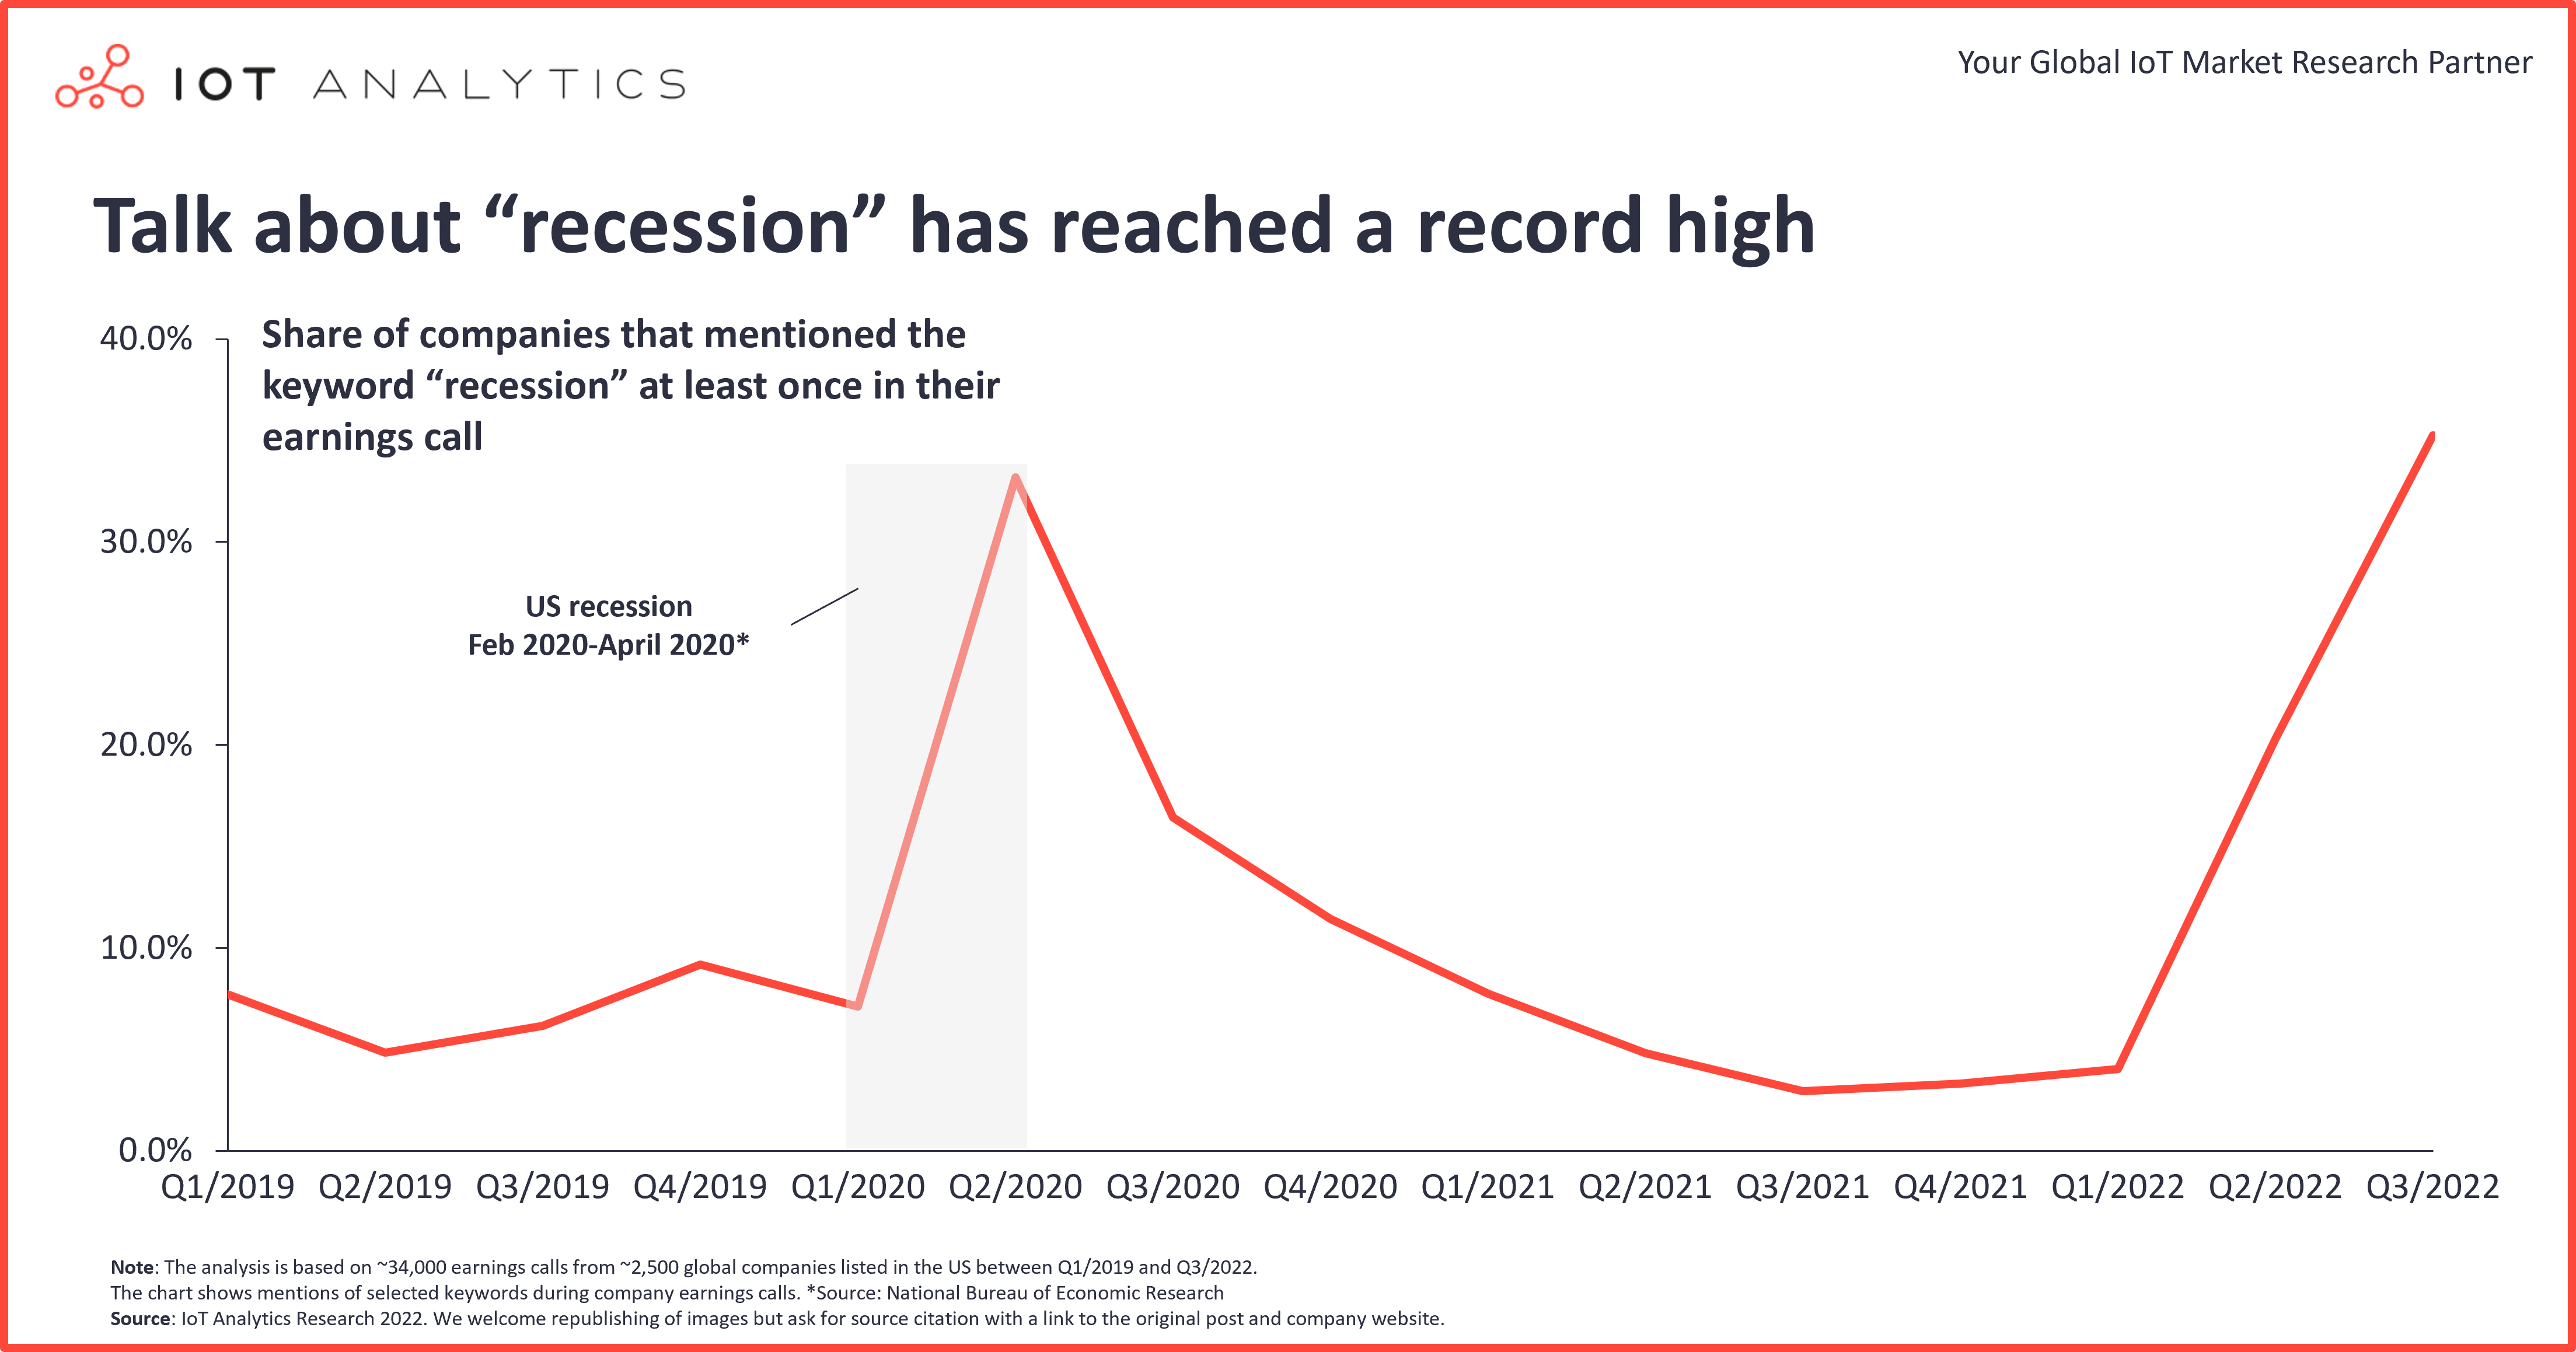 Talk about recession has reached a record high